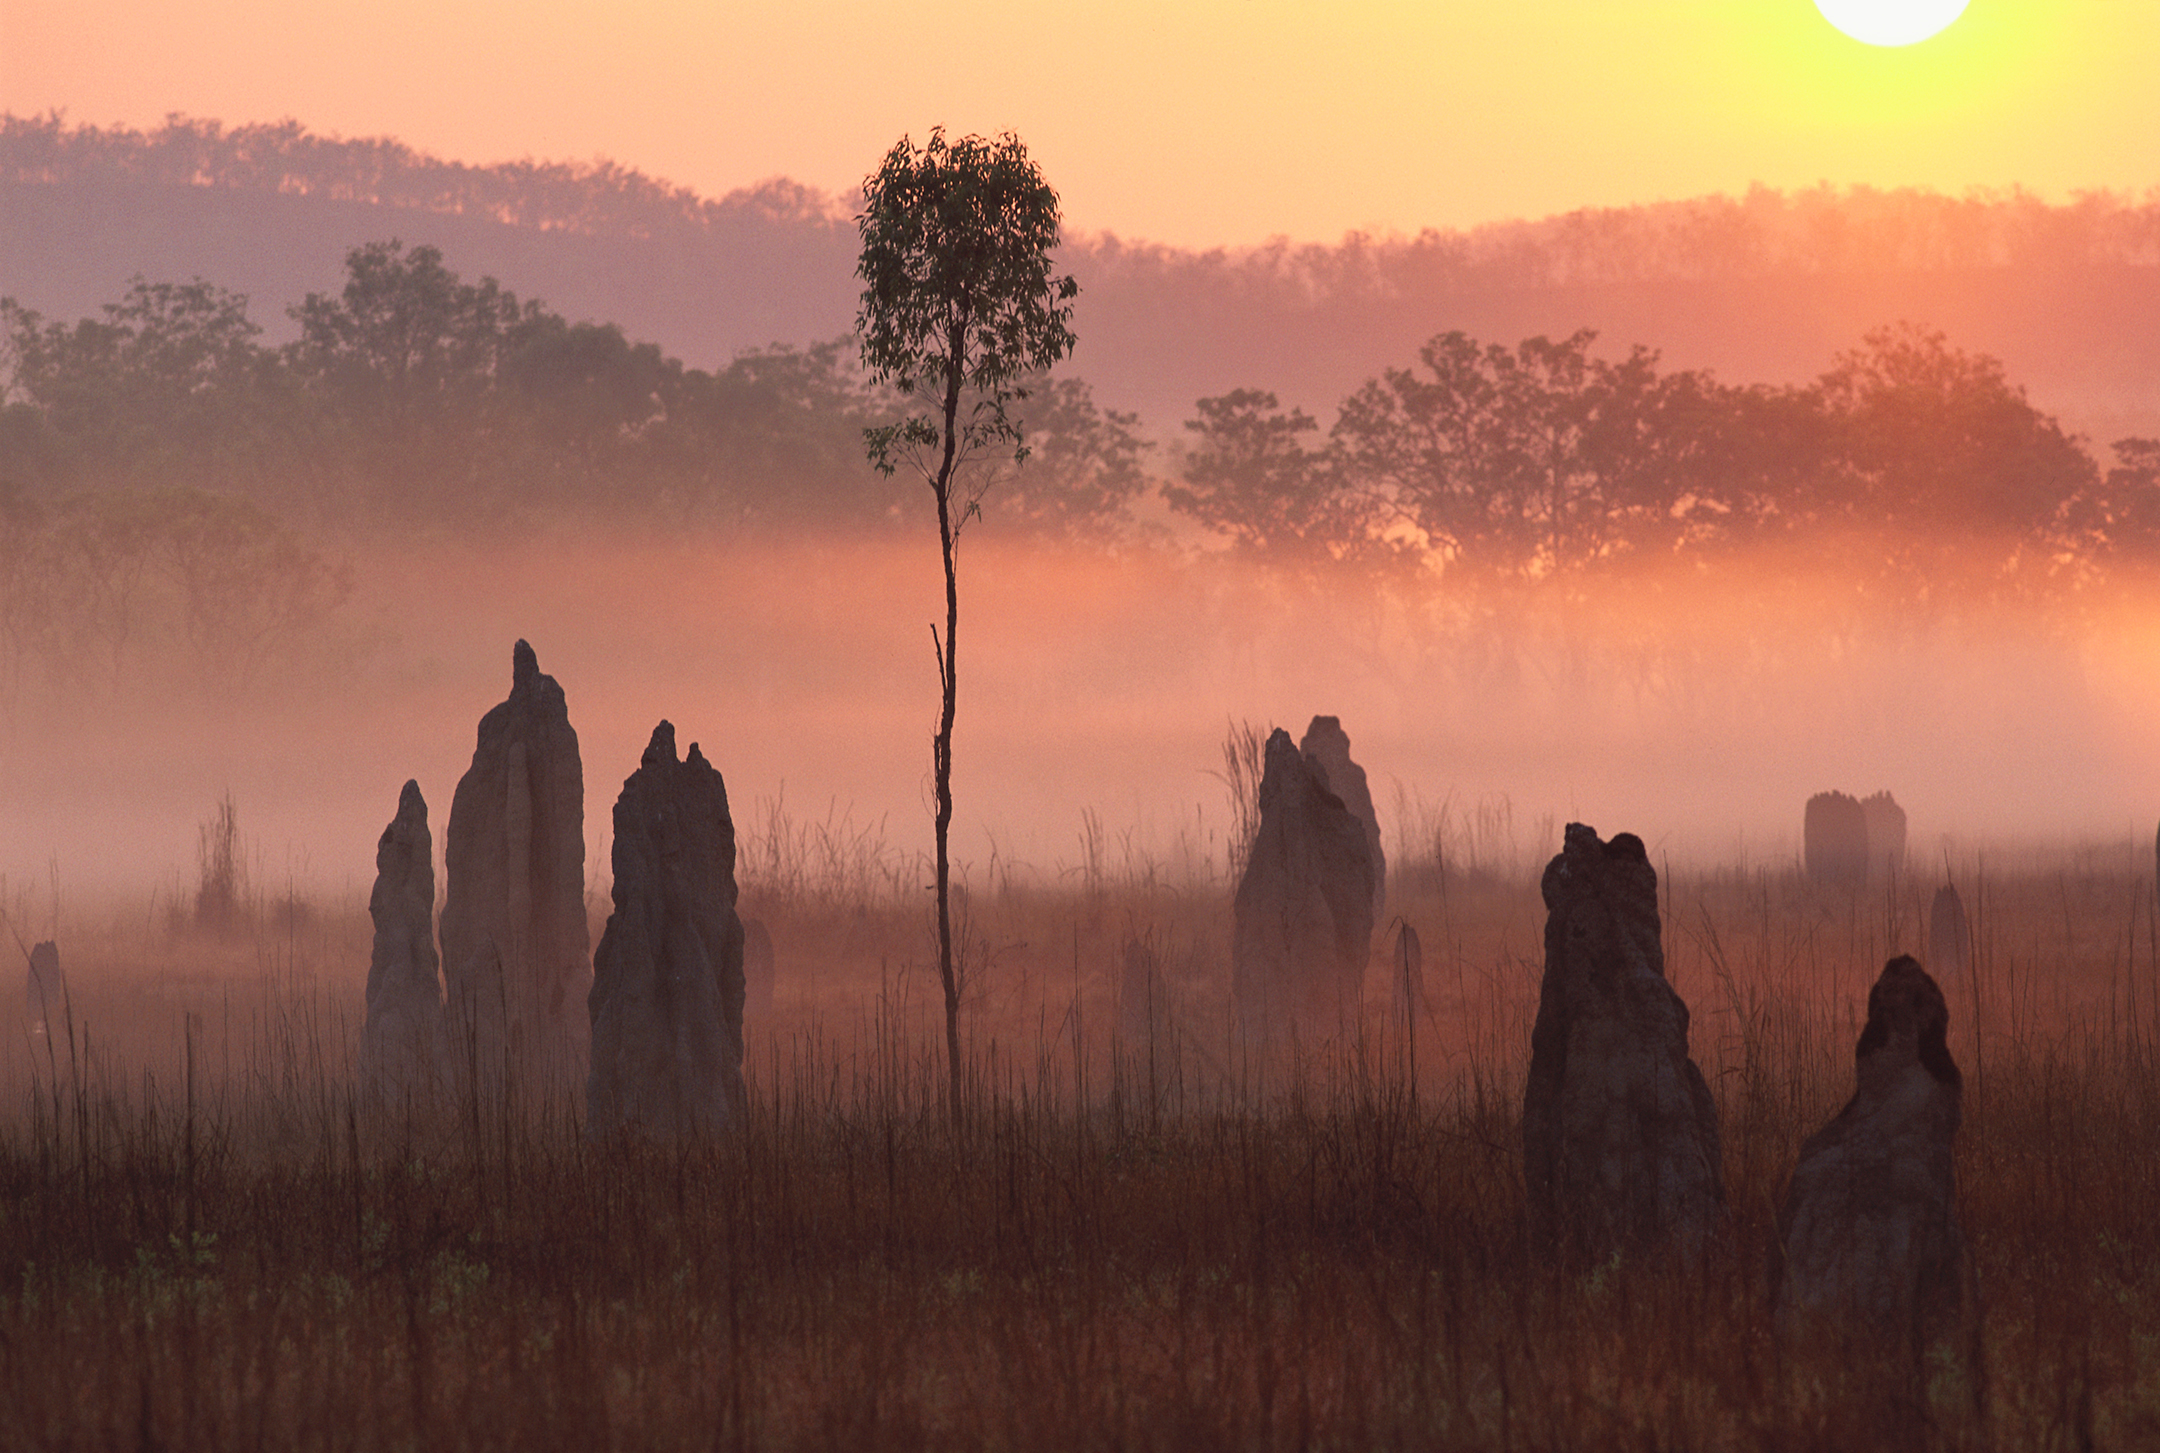 Series of termite mounds in a field at sunrise